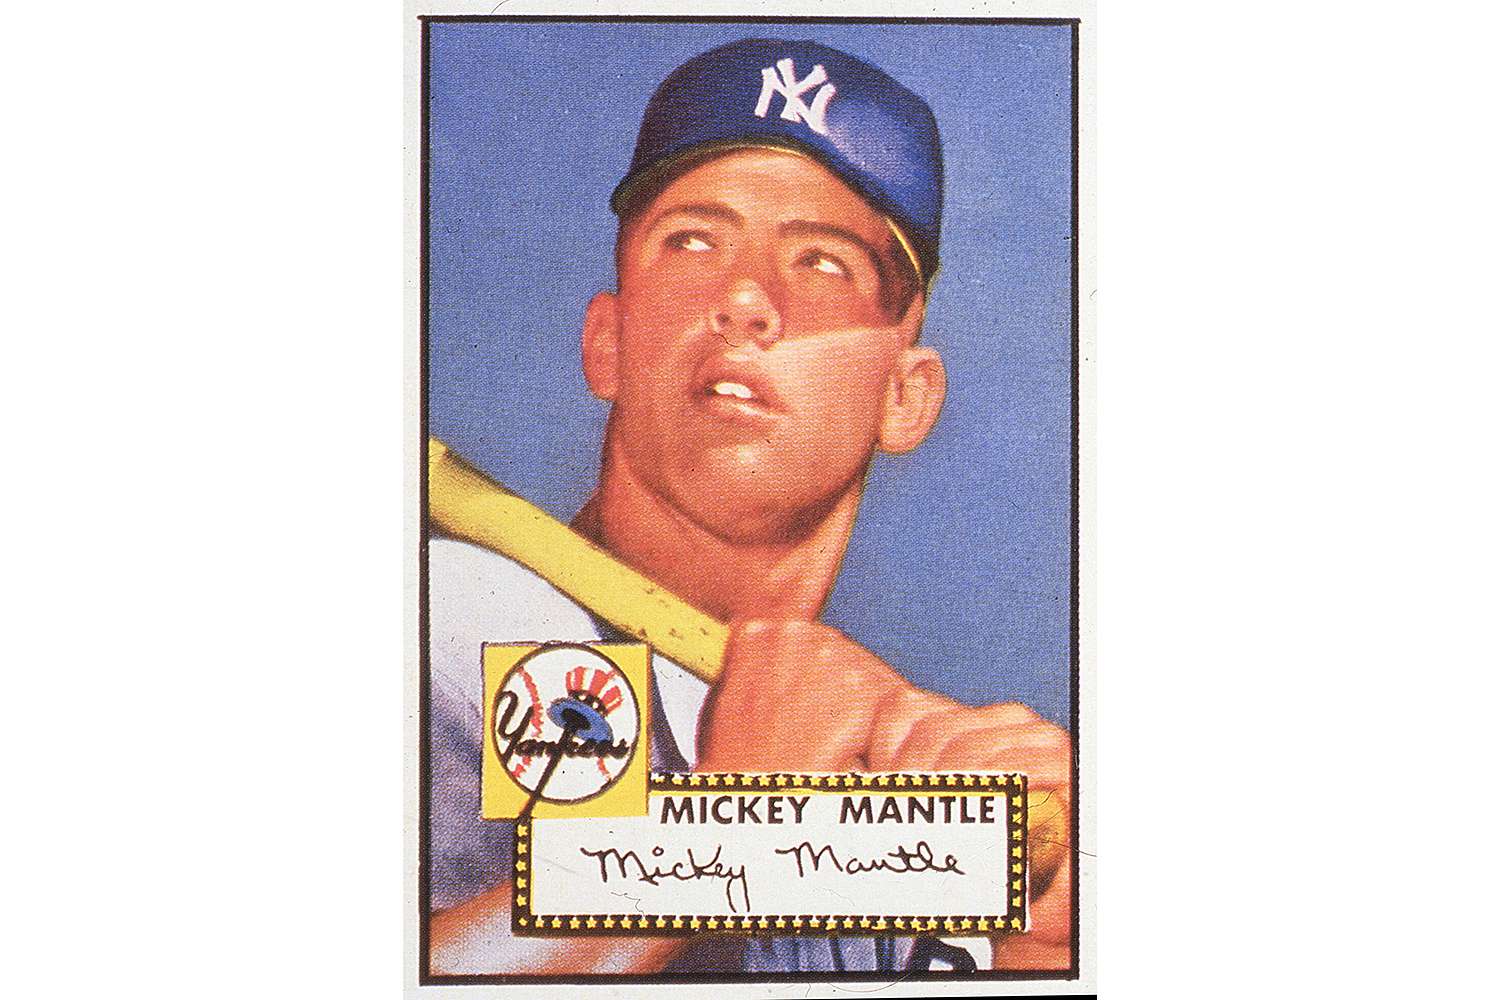 Mickey Mantle Baseball Card Sells for Record $8.8 Million   PEOPLE.com